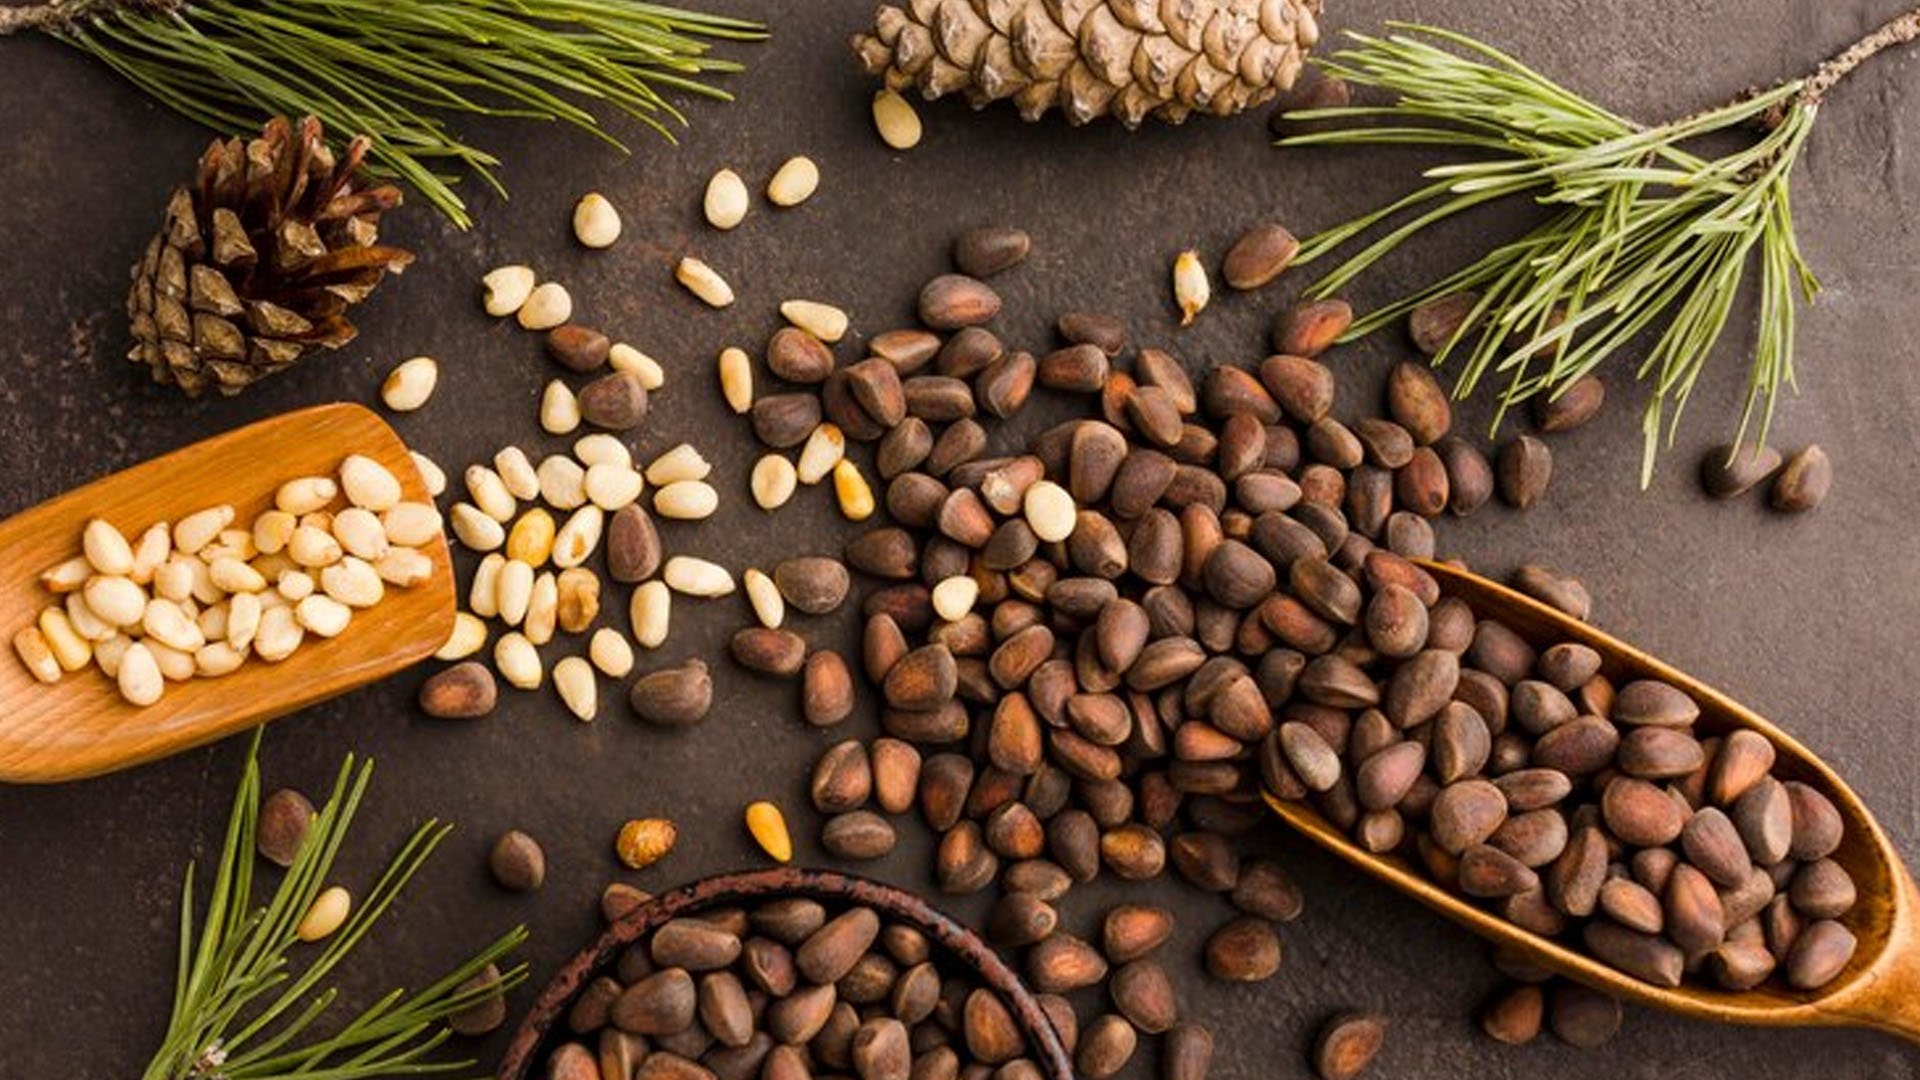 What are the Health Benefits of Pine Nuts?